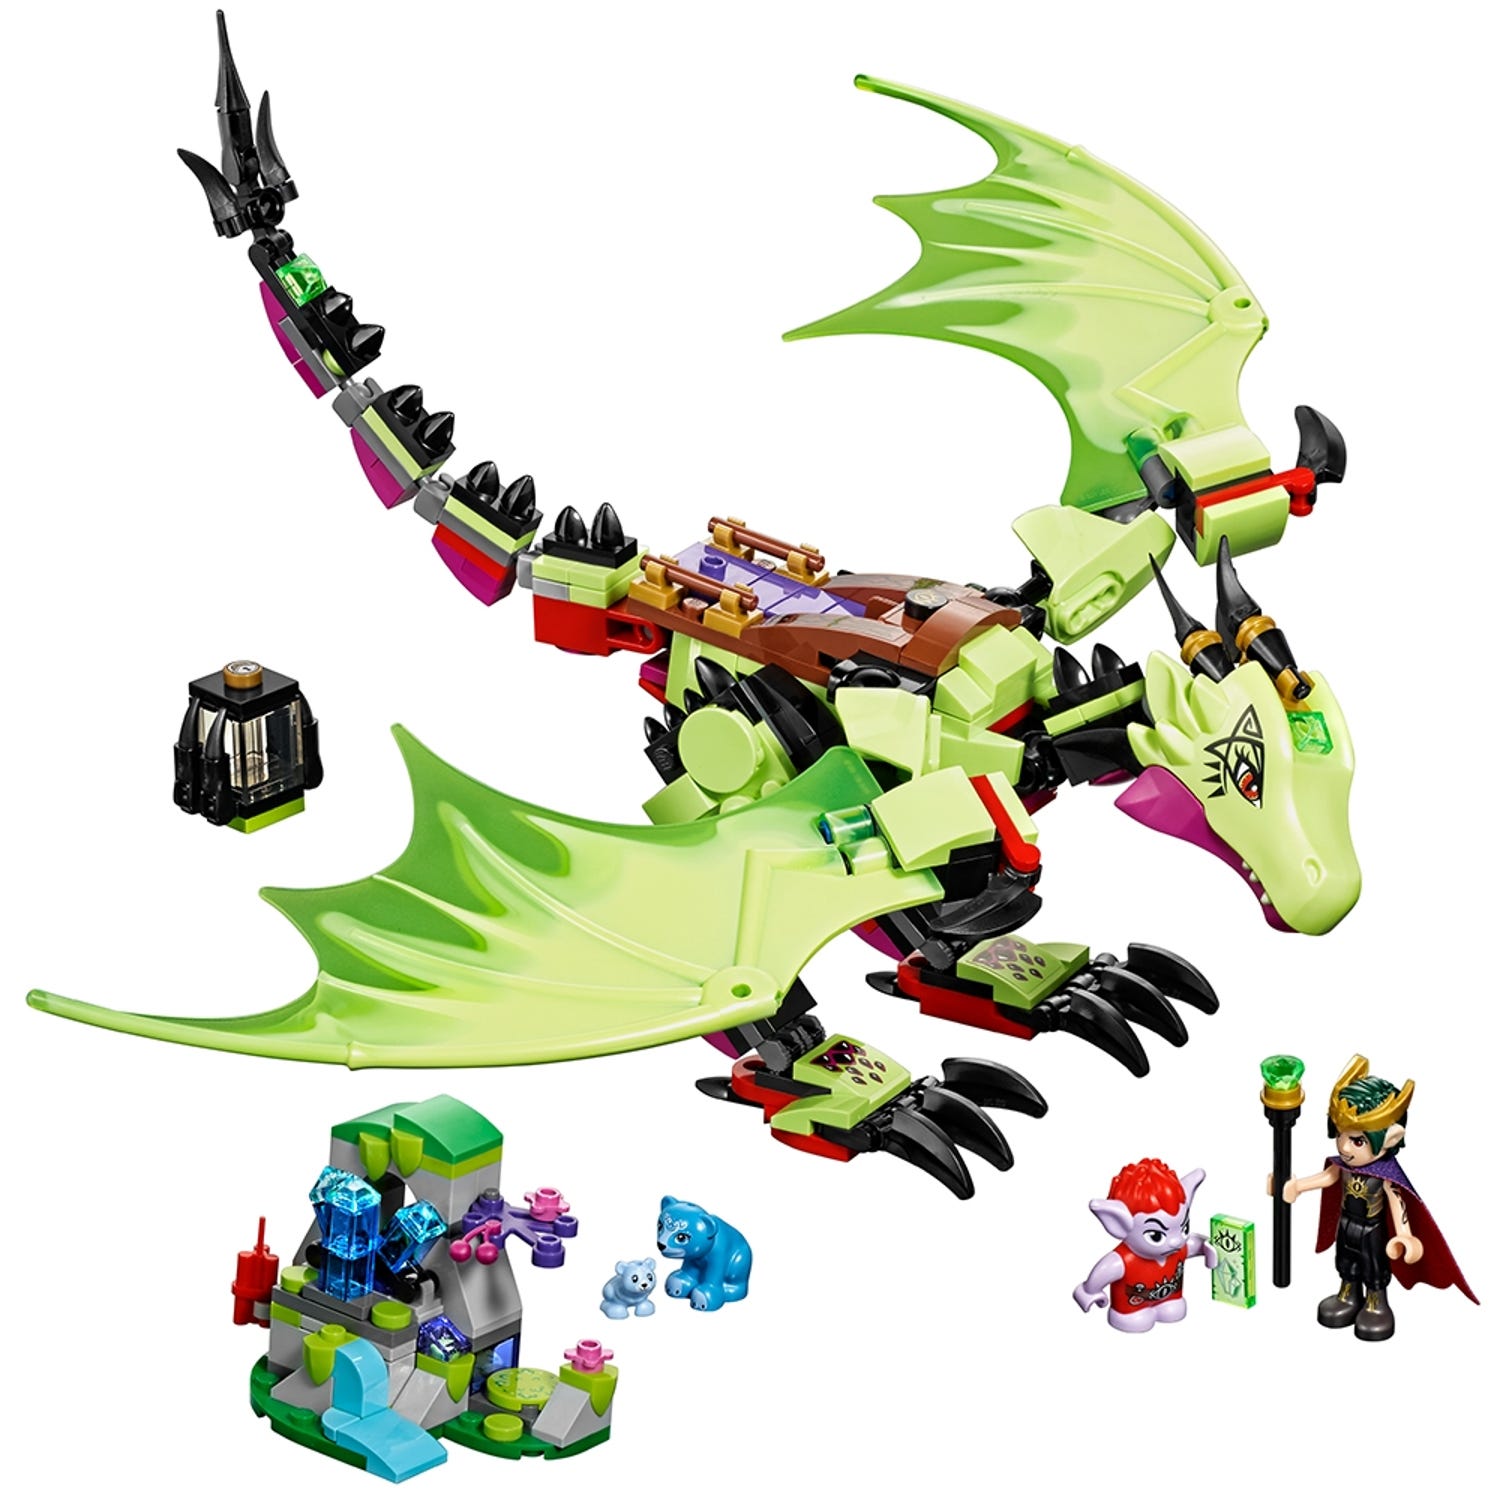 The King's Evil Dragon 41183 | | Buy online at the LEGO® Shop US